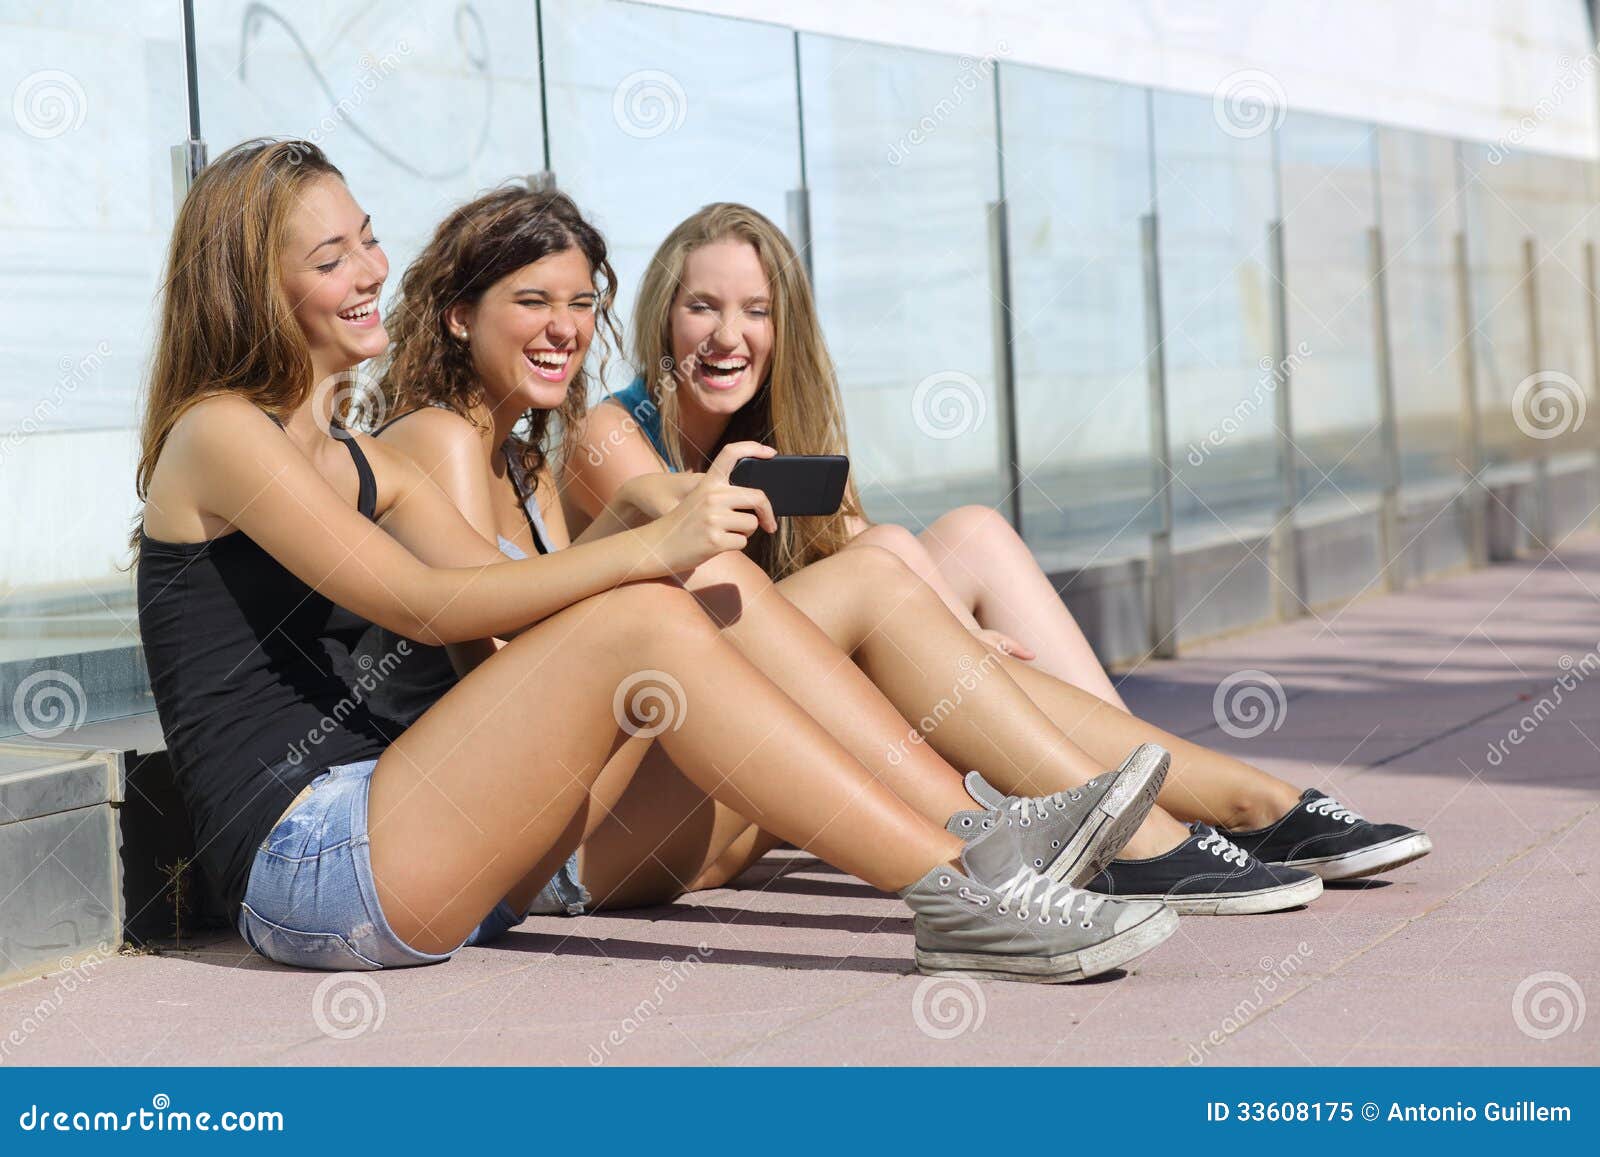 group of three teenager girls laughing while watching the smart phone